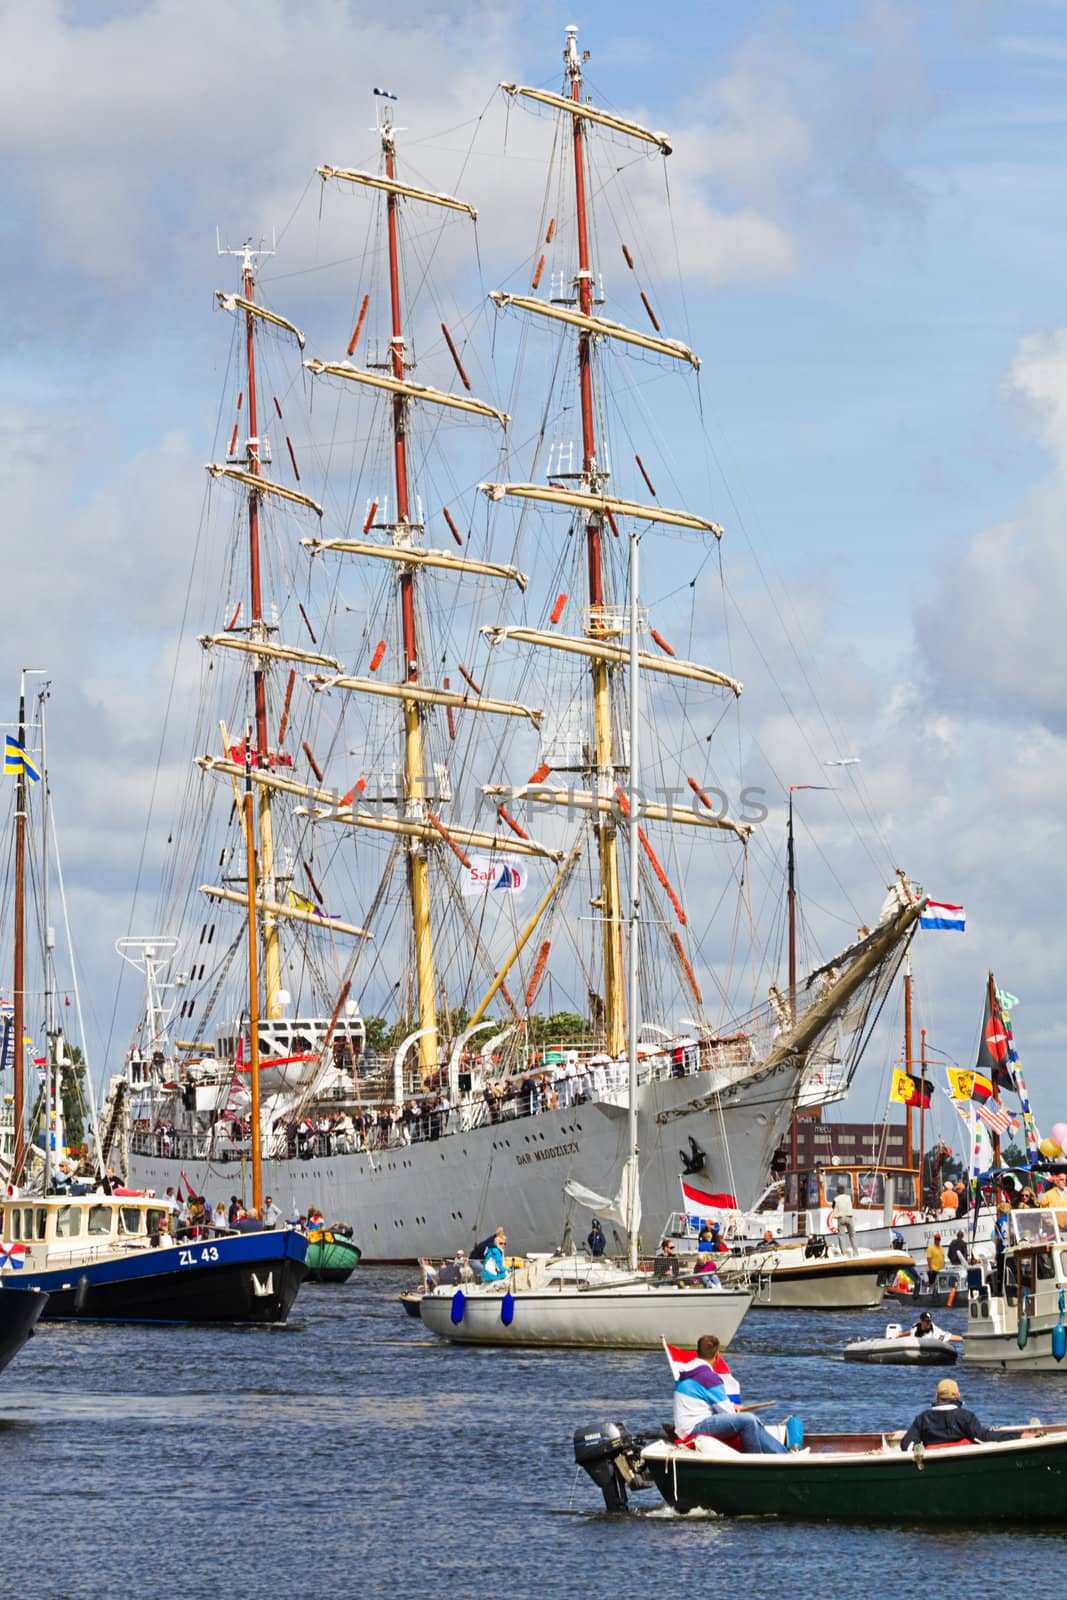 SAIL AMSTERDAM 2010 -IJMUIDEN, THE NETHERLANDS - AUGUST 2010: Sail 2010 starts with the spectaculair Sail-in Parade.  50 Tall ships and more than 500 of  naval ships, replicas and yachts sail in convoy through the North Sea Canal from IJmuiden to Amsterdam. Thousands of private boats accompany the fleet and more than 300.000 visitors watch the parade from the banks. August 19, 2010, IJmuiden, the Netherlands